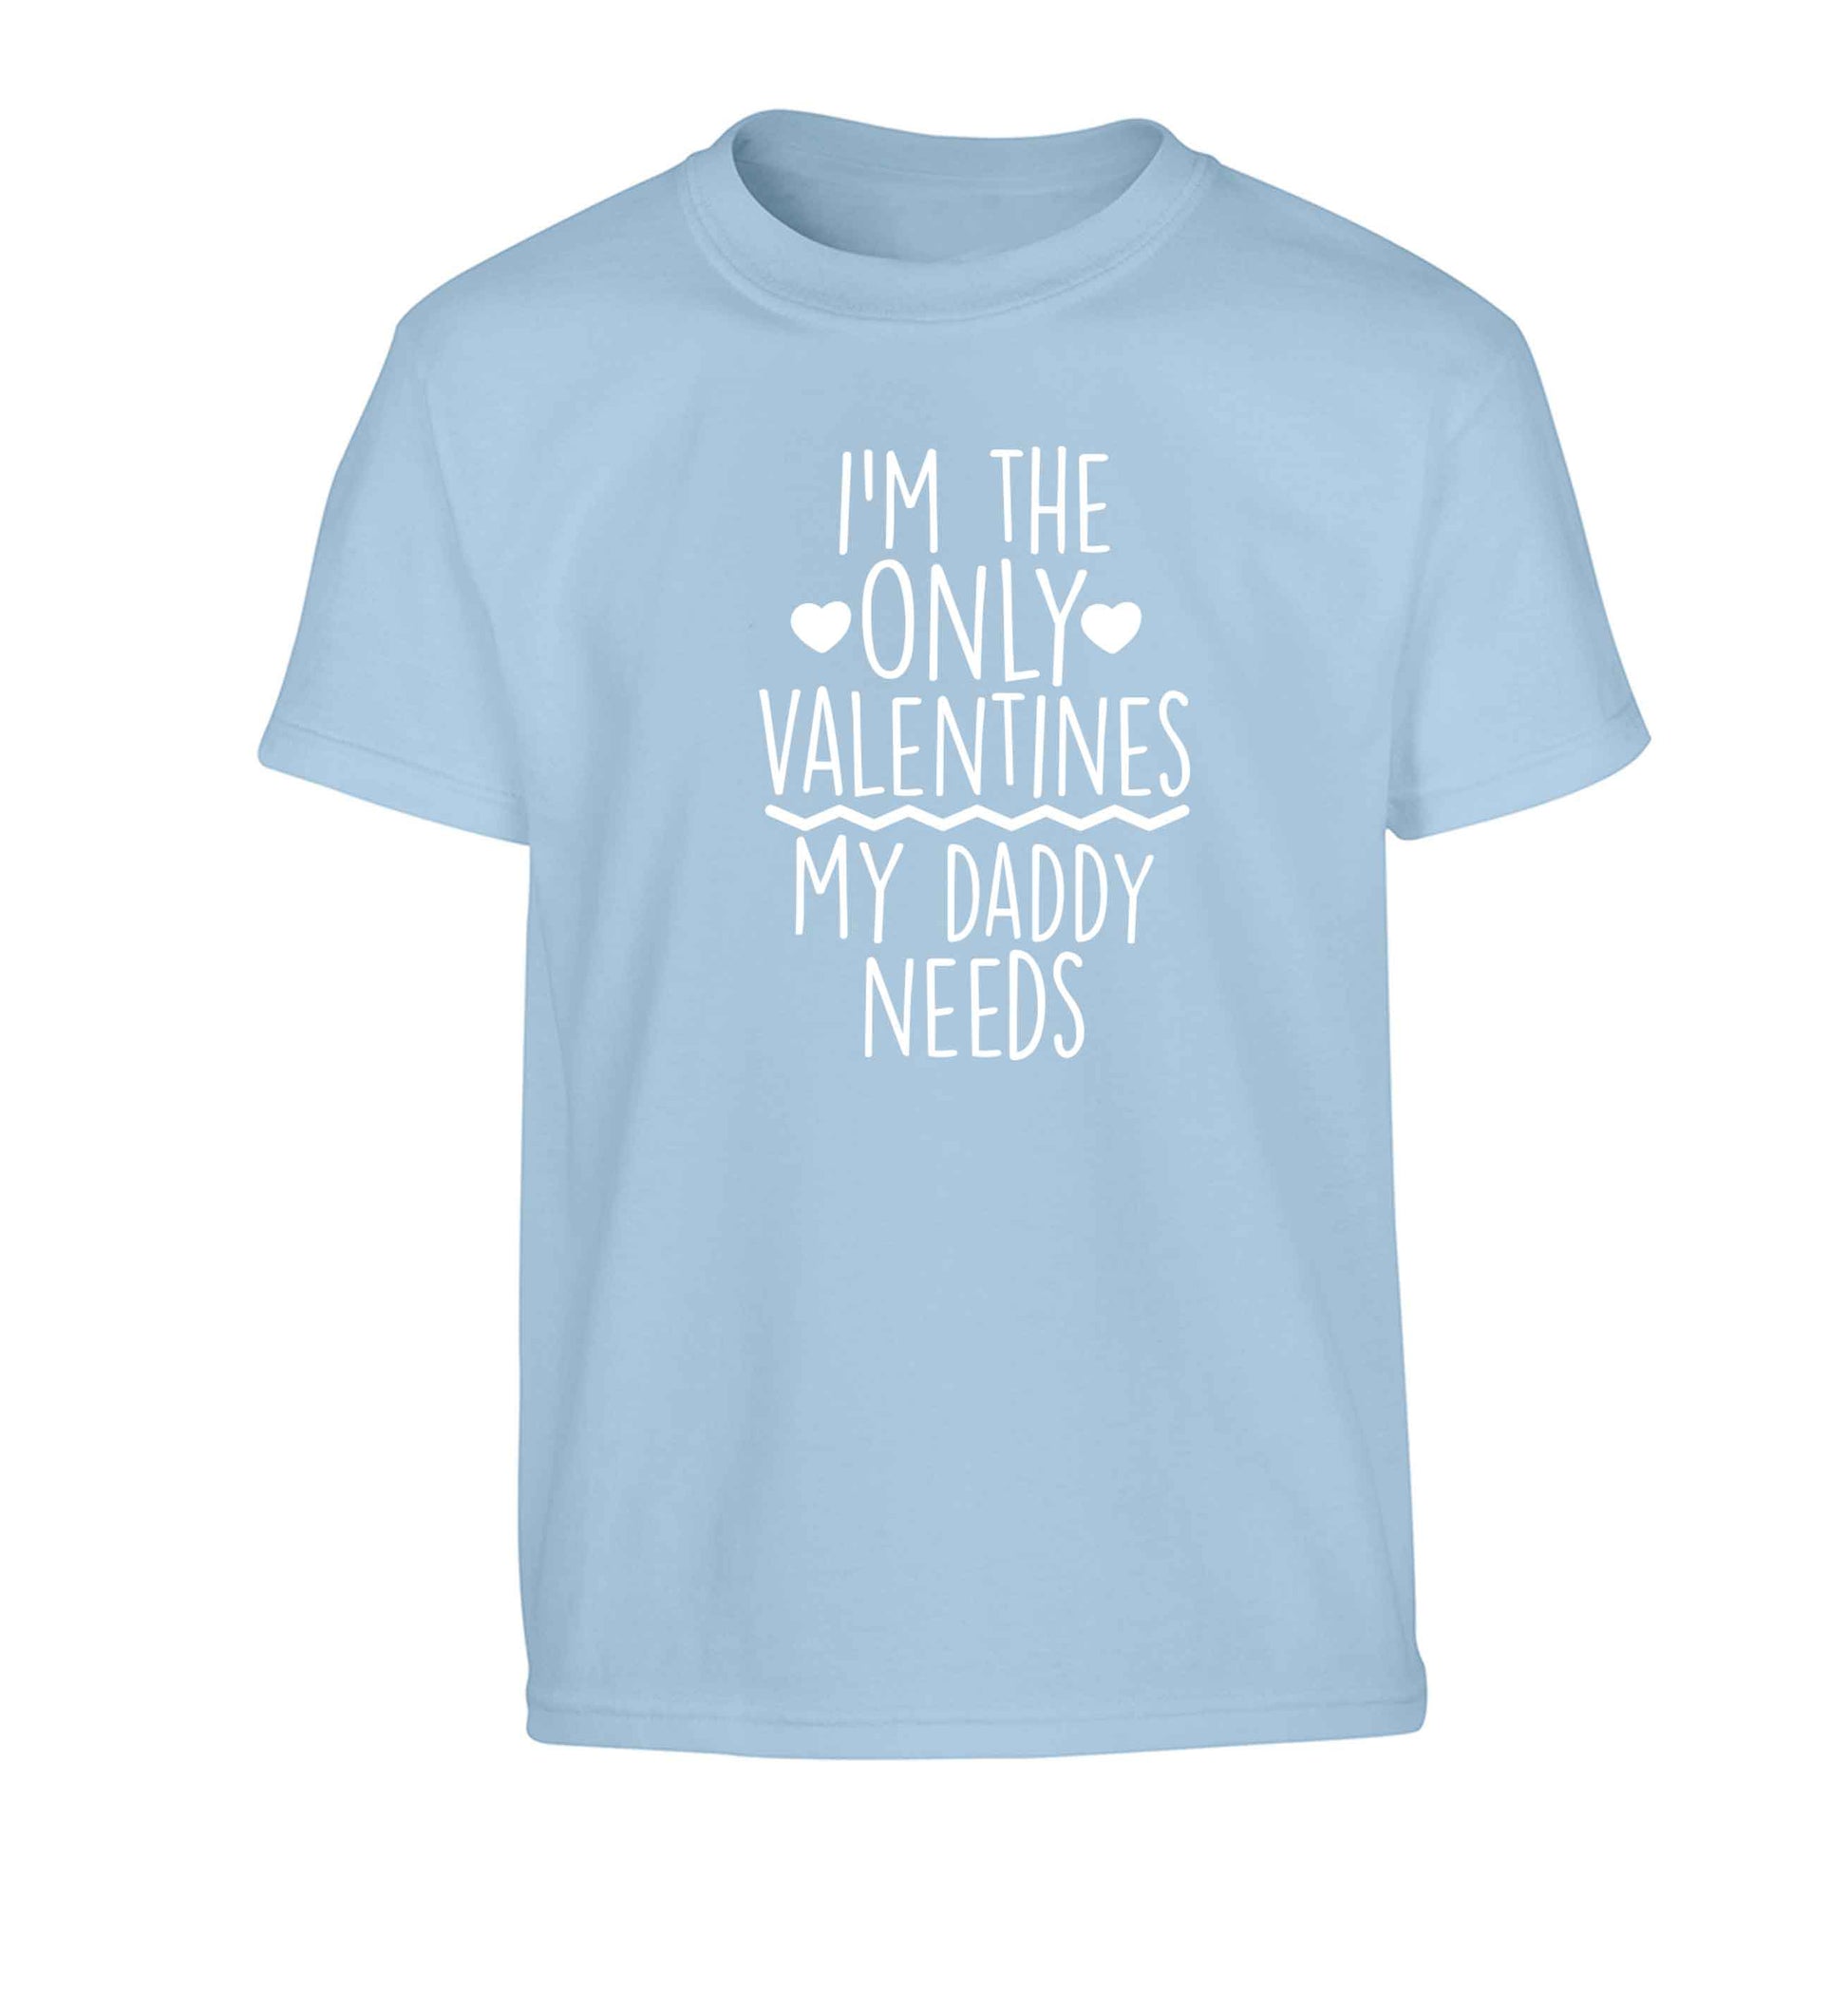 I'm the only valentines my daddy needs Children's light blue Tshirt 12-13 Years